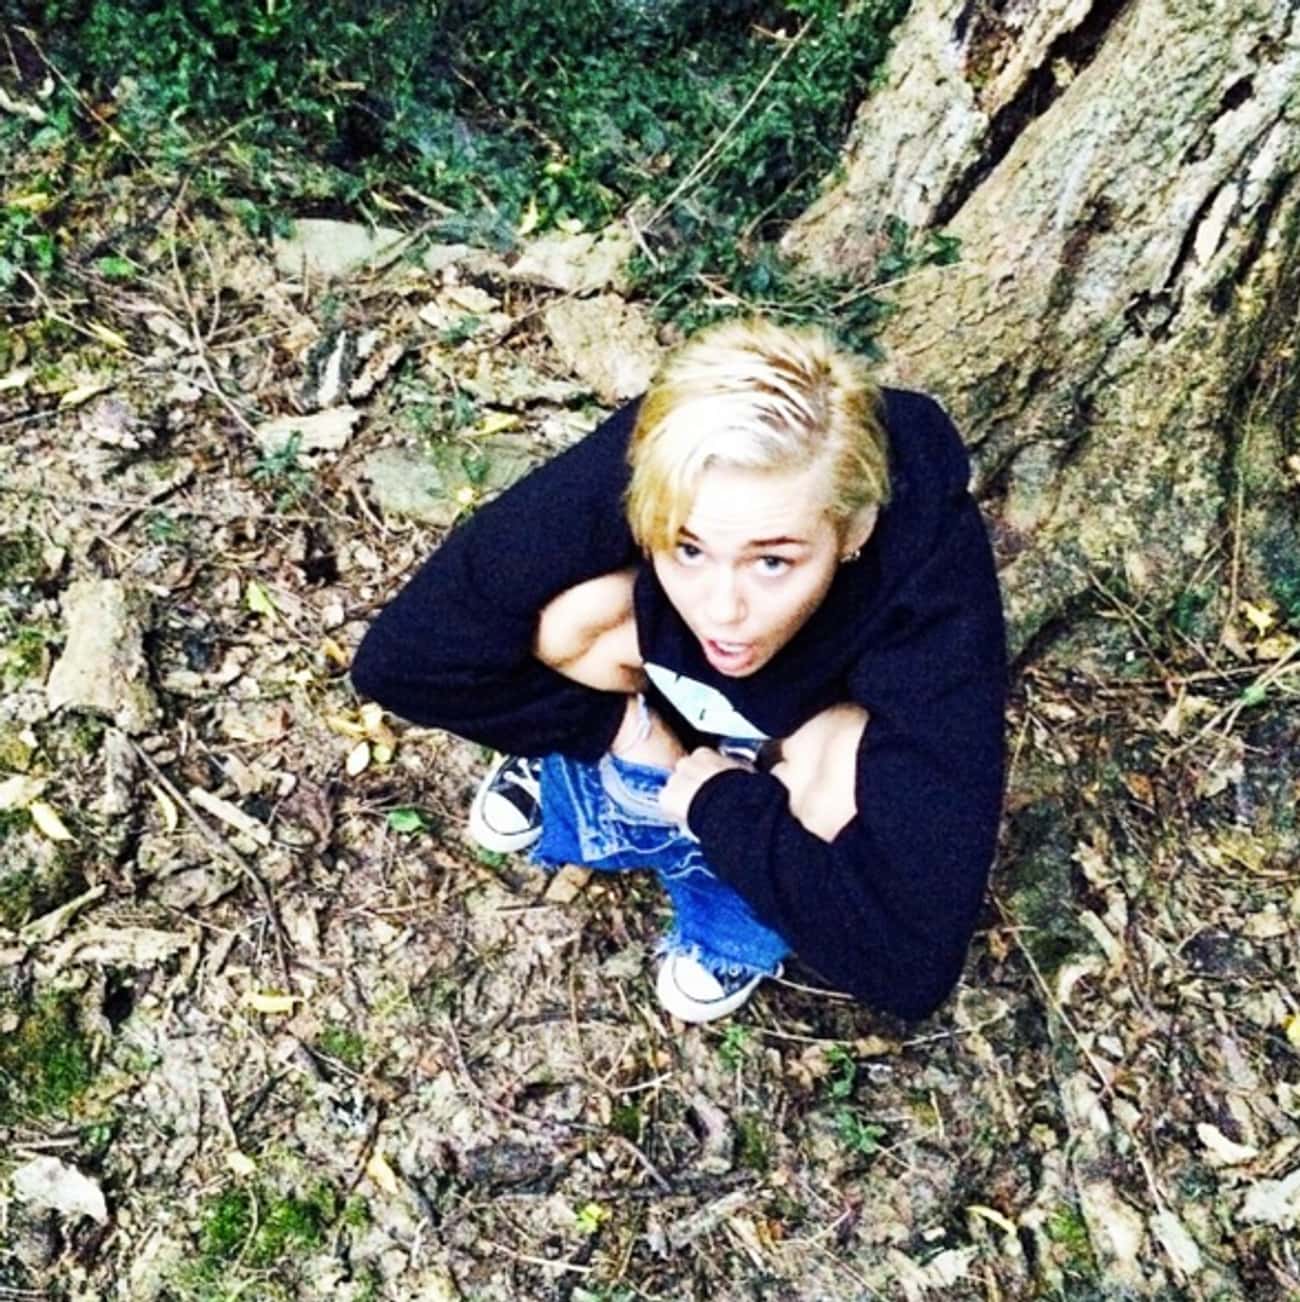 She Took a Picure Peeing on a Tree.